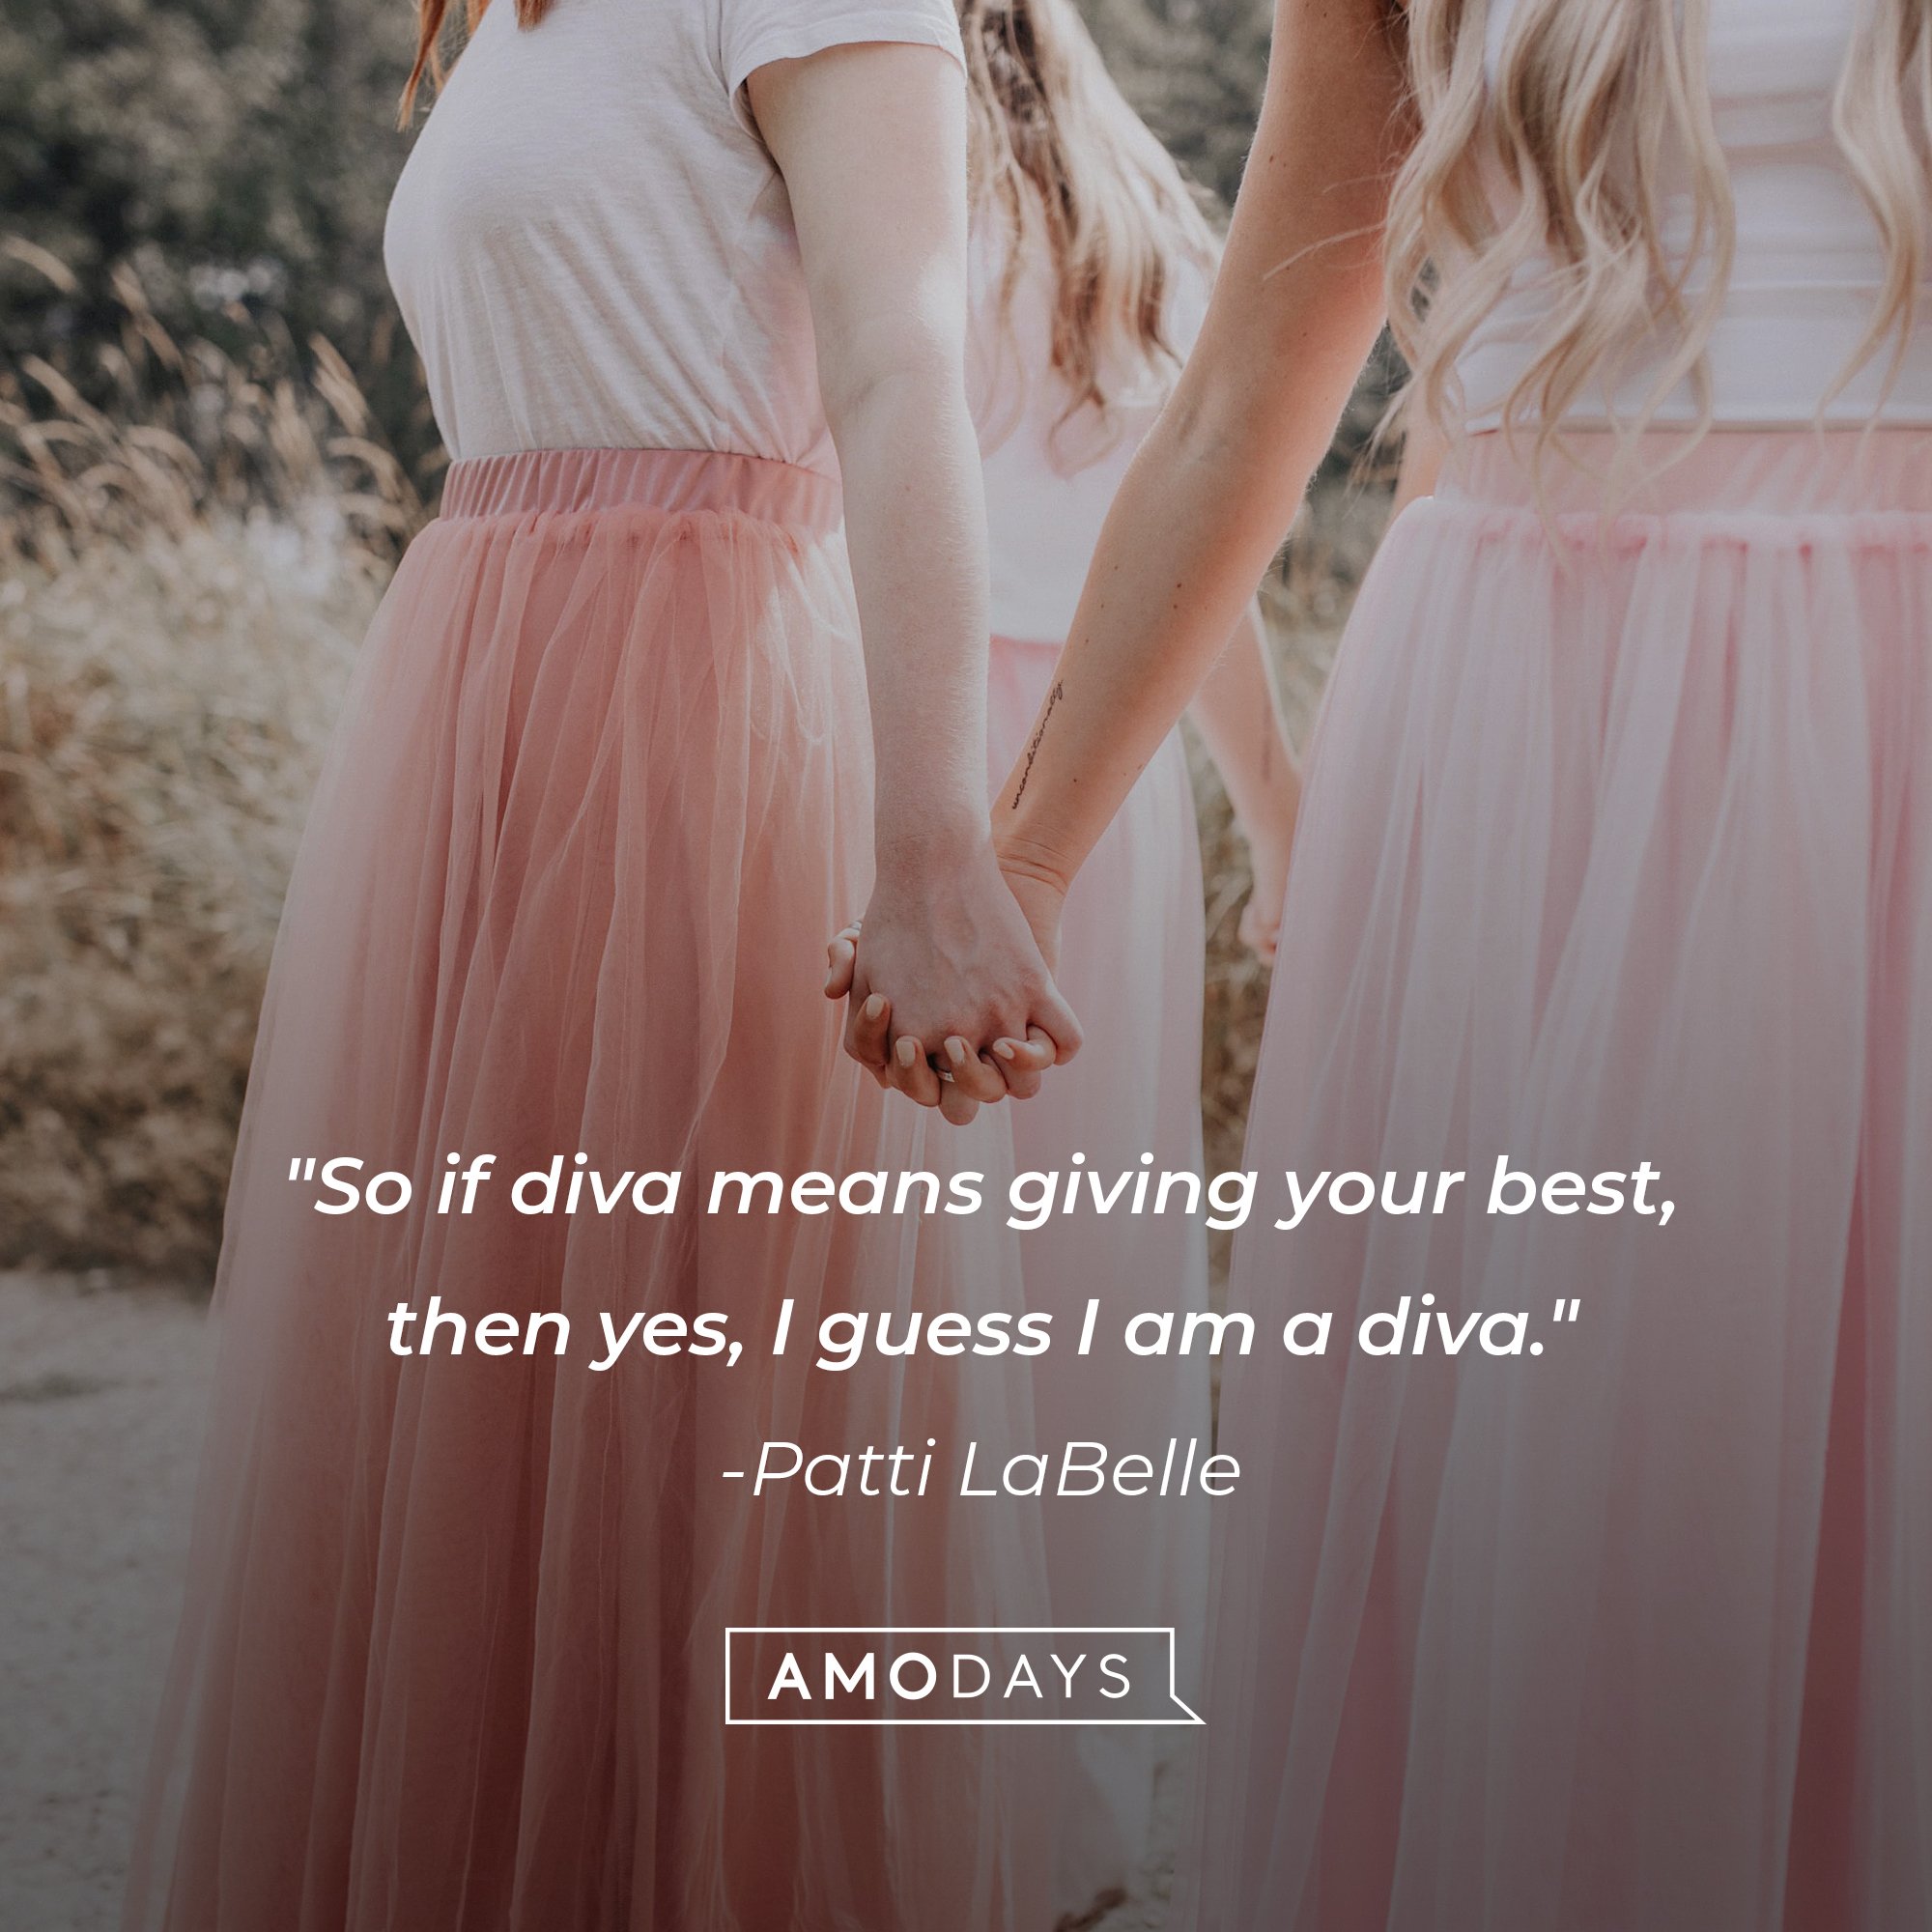 Patti LaBelle's quote: "So if diva means giving your best, then yes, I guess I am a diva." | Image: AmoDays 